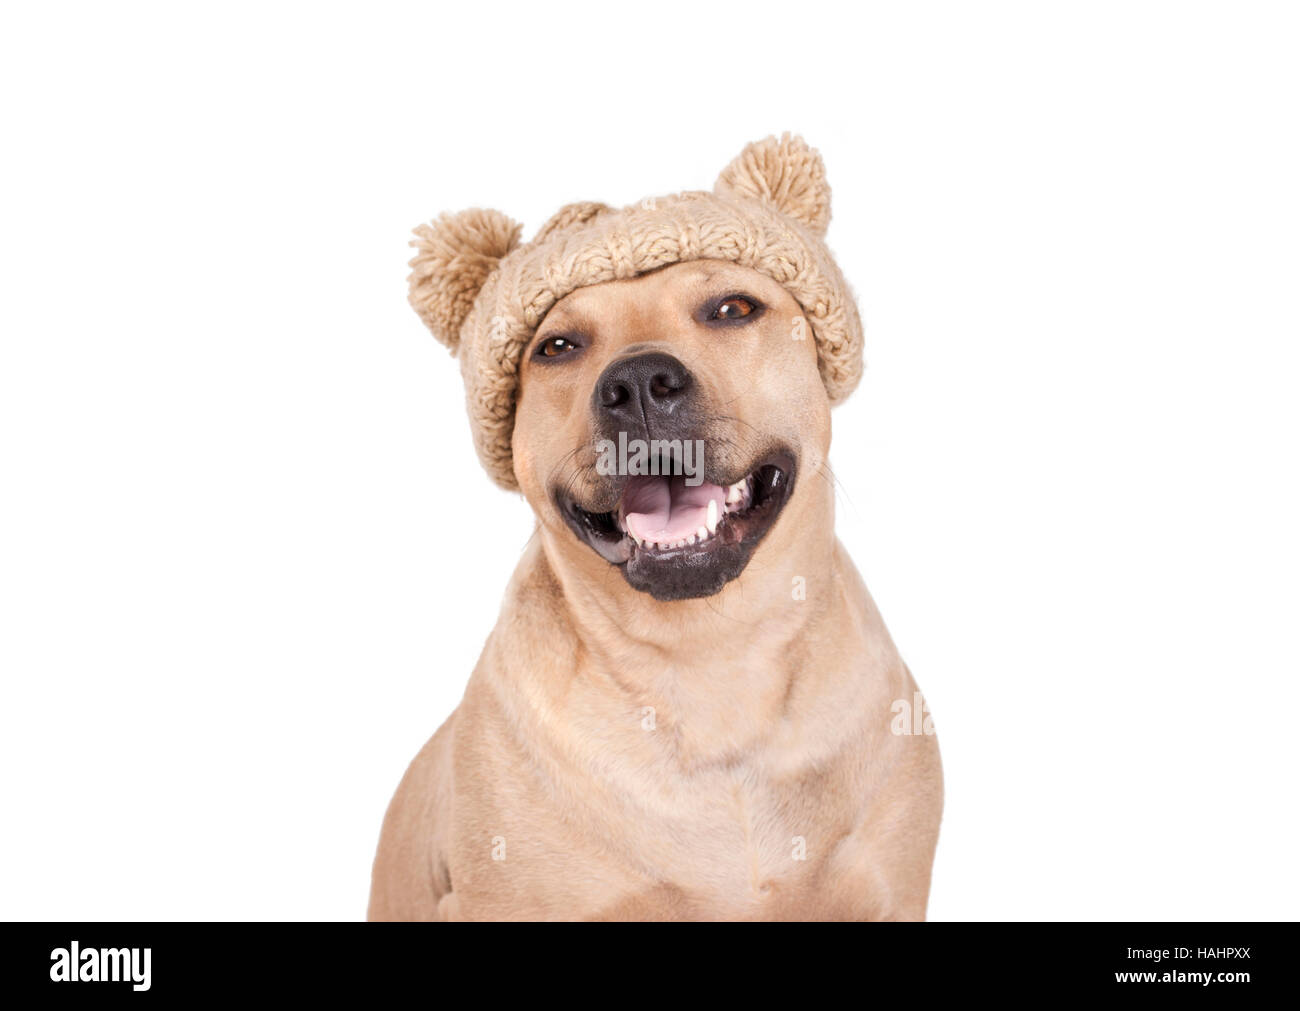 american pitbull terrier dog smiling and wearing knitted hat Stock Photo